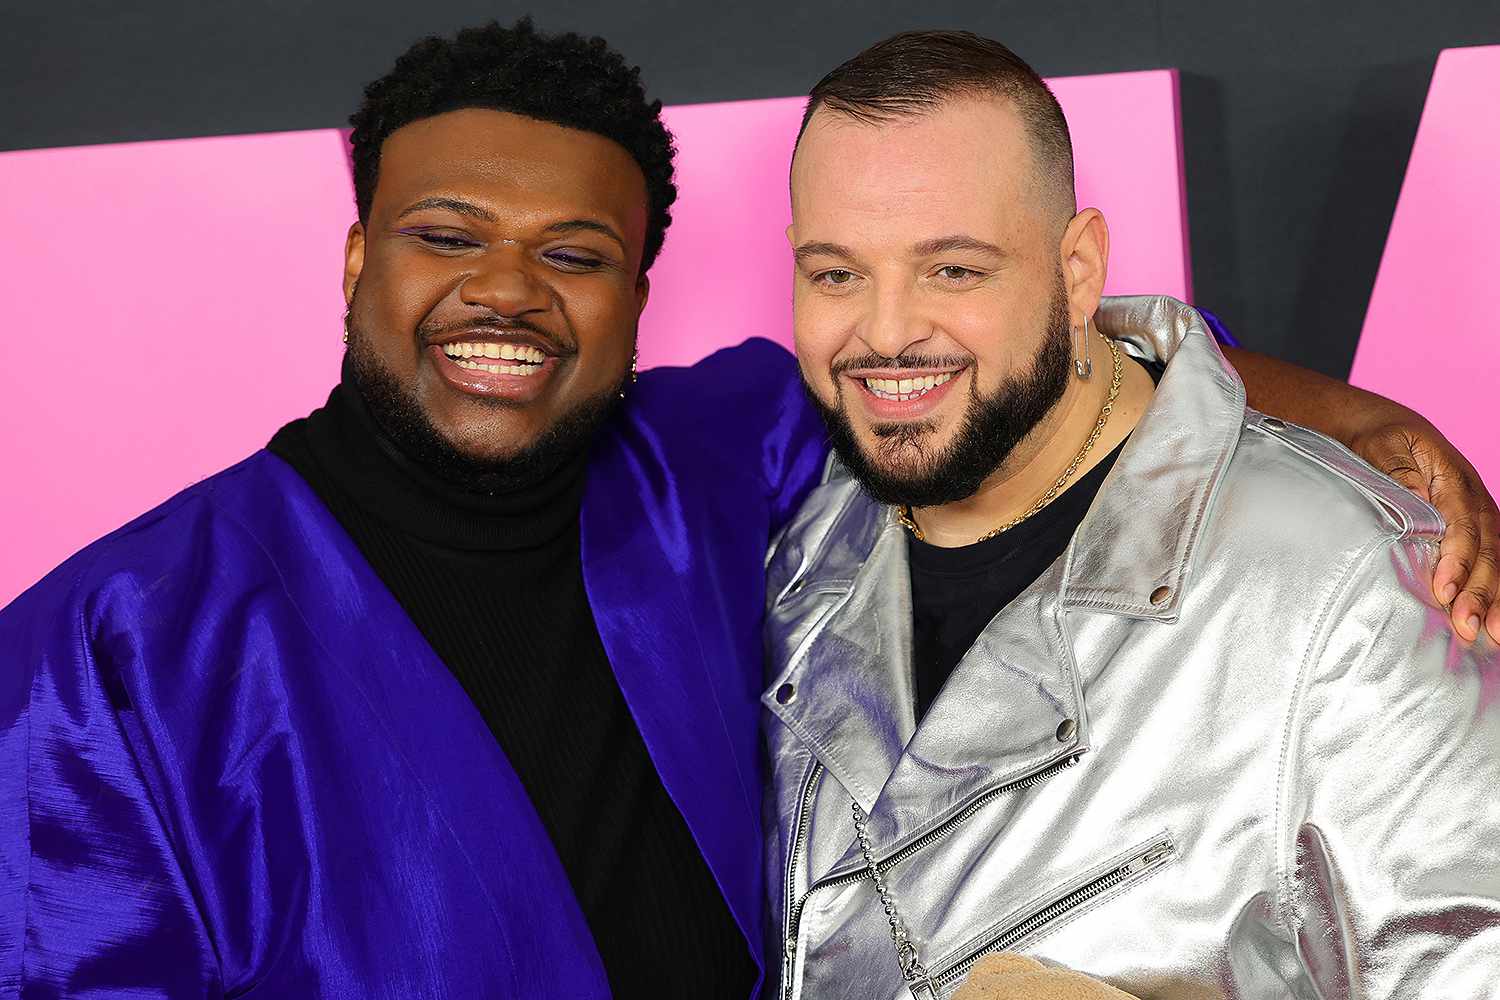 Jaquel Spivey and Daniel Franzese attend the "Mean Girls" premiere